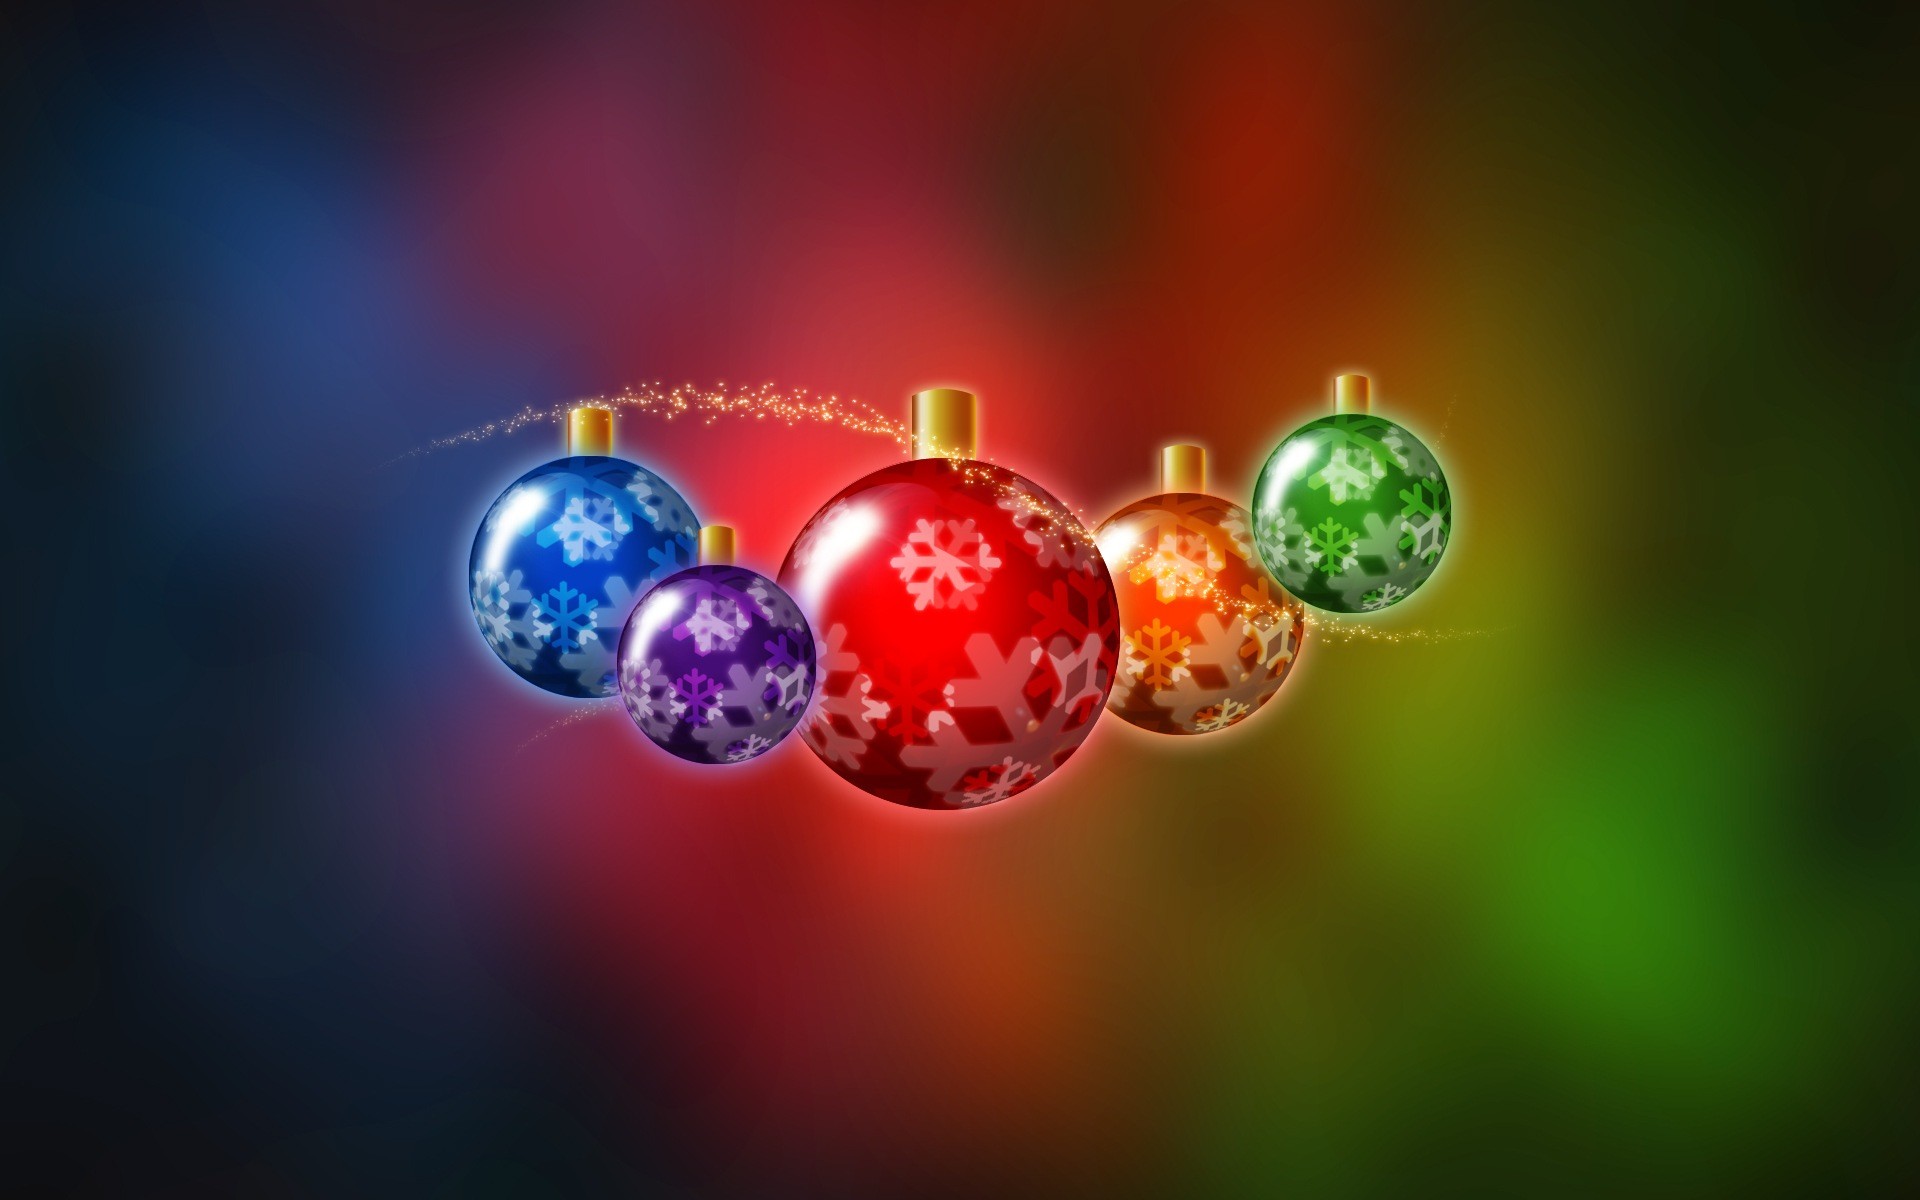 Christmas Wallpaper Widescreen 10998 Hd Wallpapers in Celebrations .